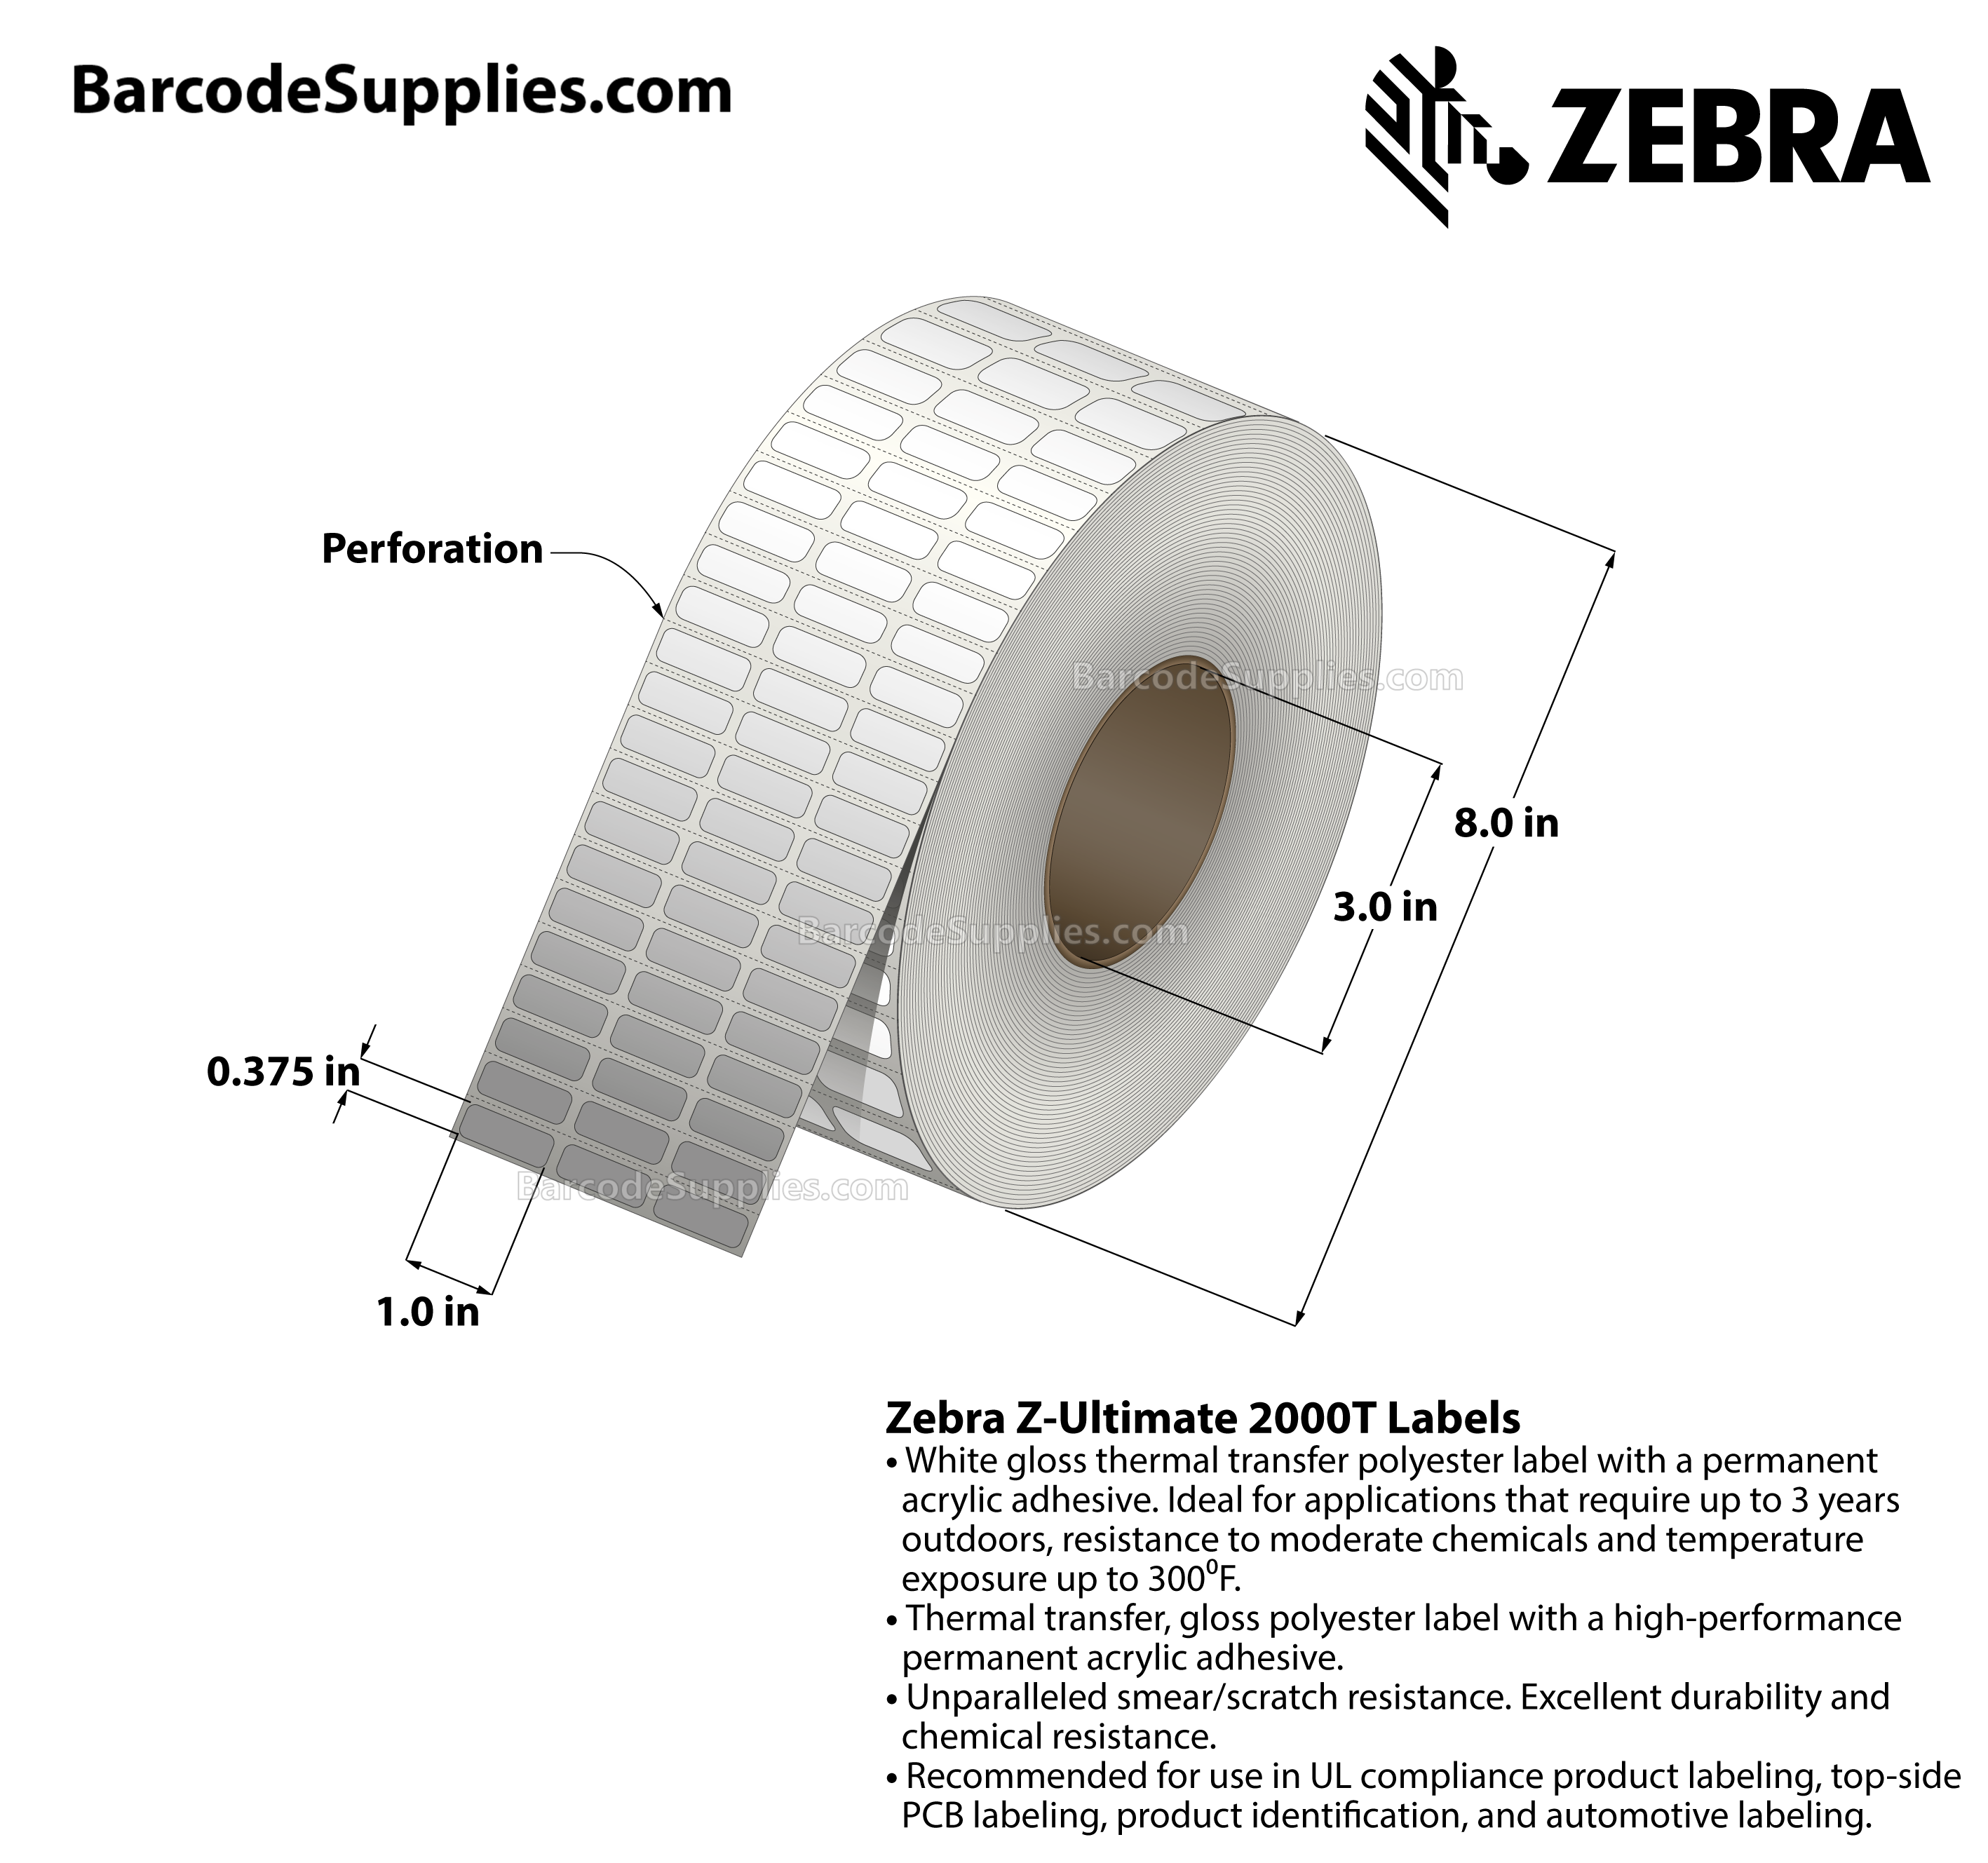 Products 1 x 0.375 Thermal Transfer White Z-Ultimate 2000T (3-Across) Labels With Permanent Adhesive - Perforated - 10002 Labels Per Roll - Carton Of 4 Rolls - 40008 Labels Total - MPN: 10011976